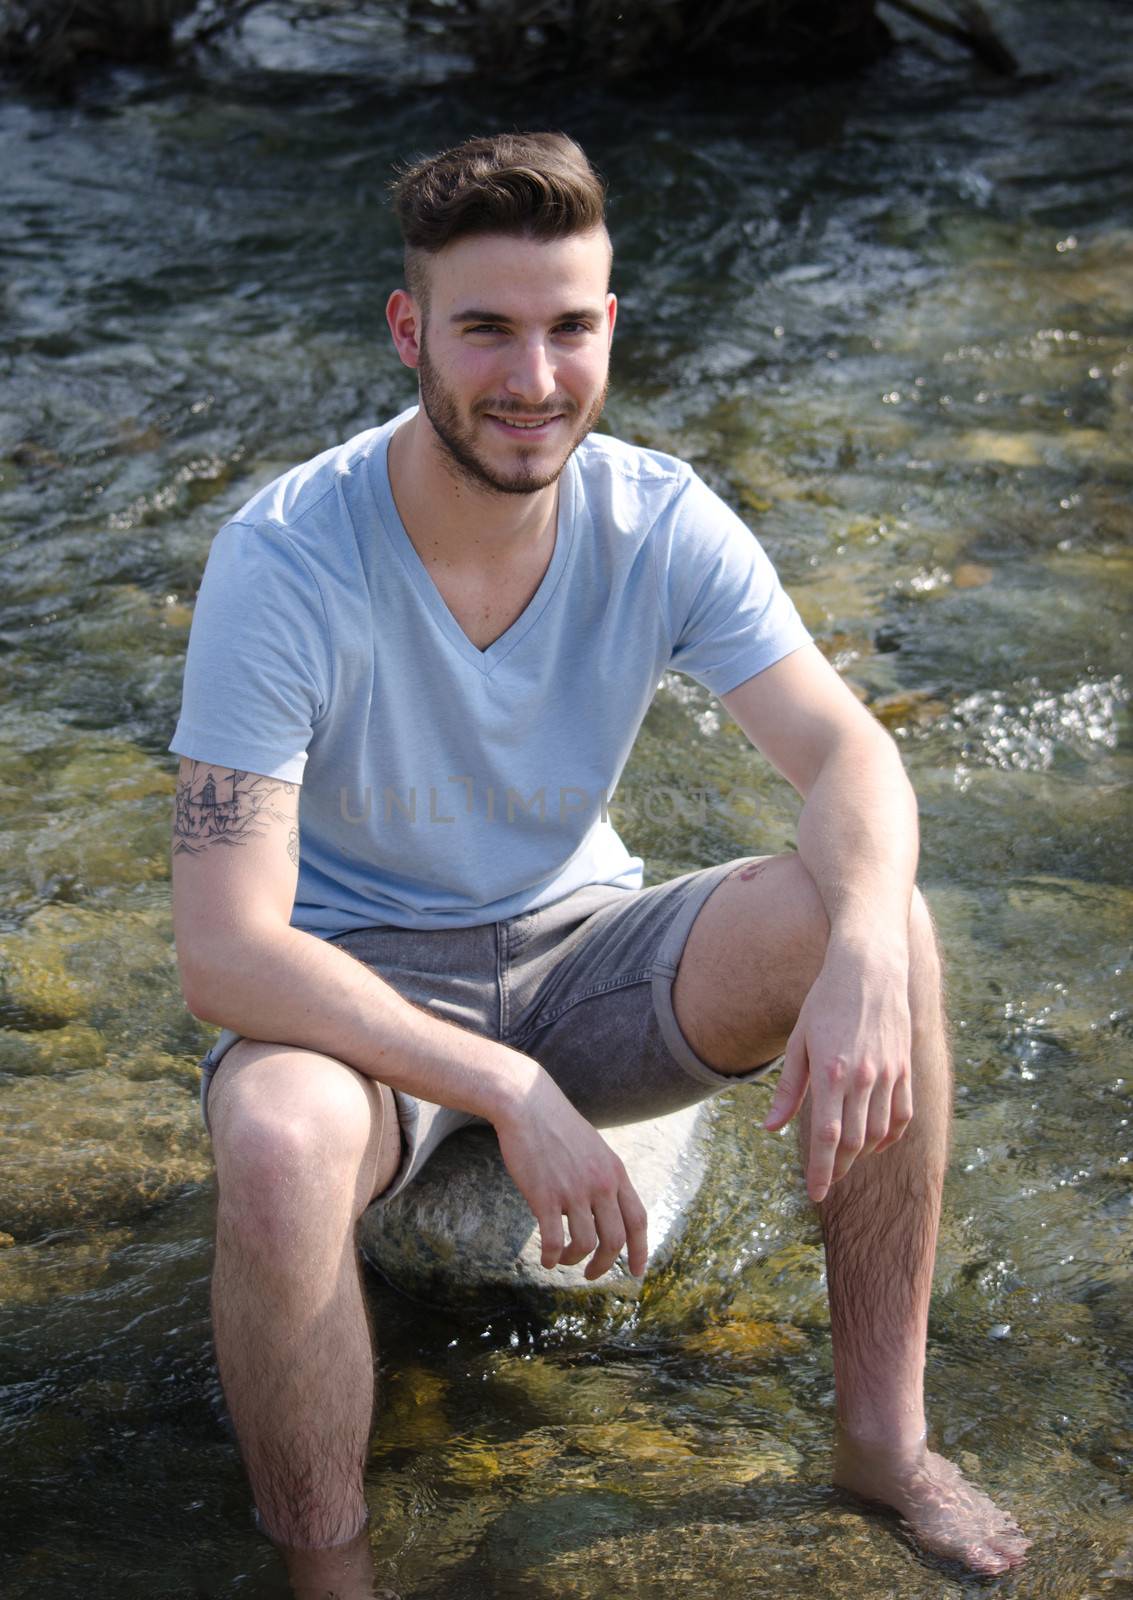 Attractive young man sitting on rock in a river, smiling with feet in the water